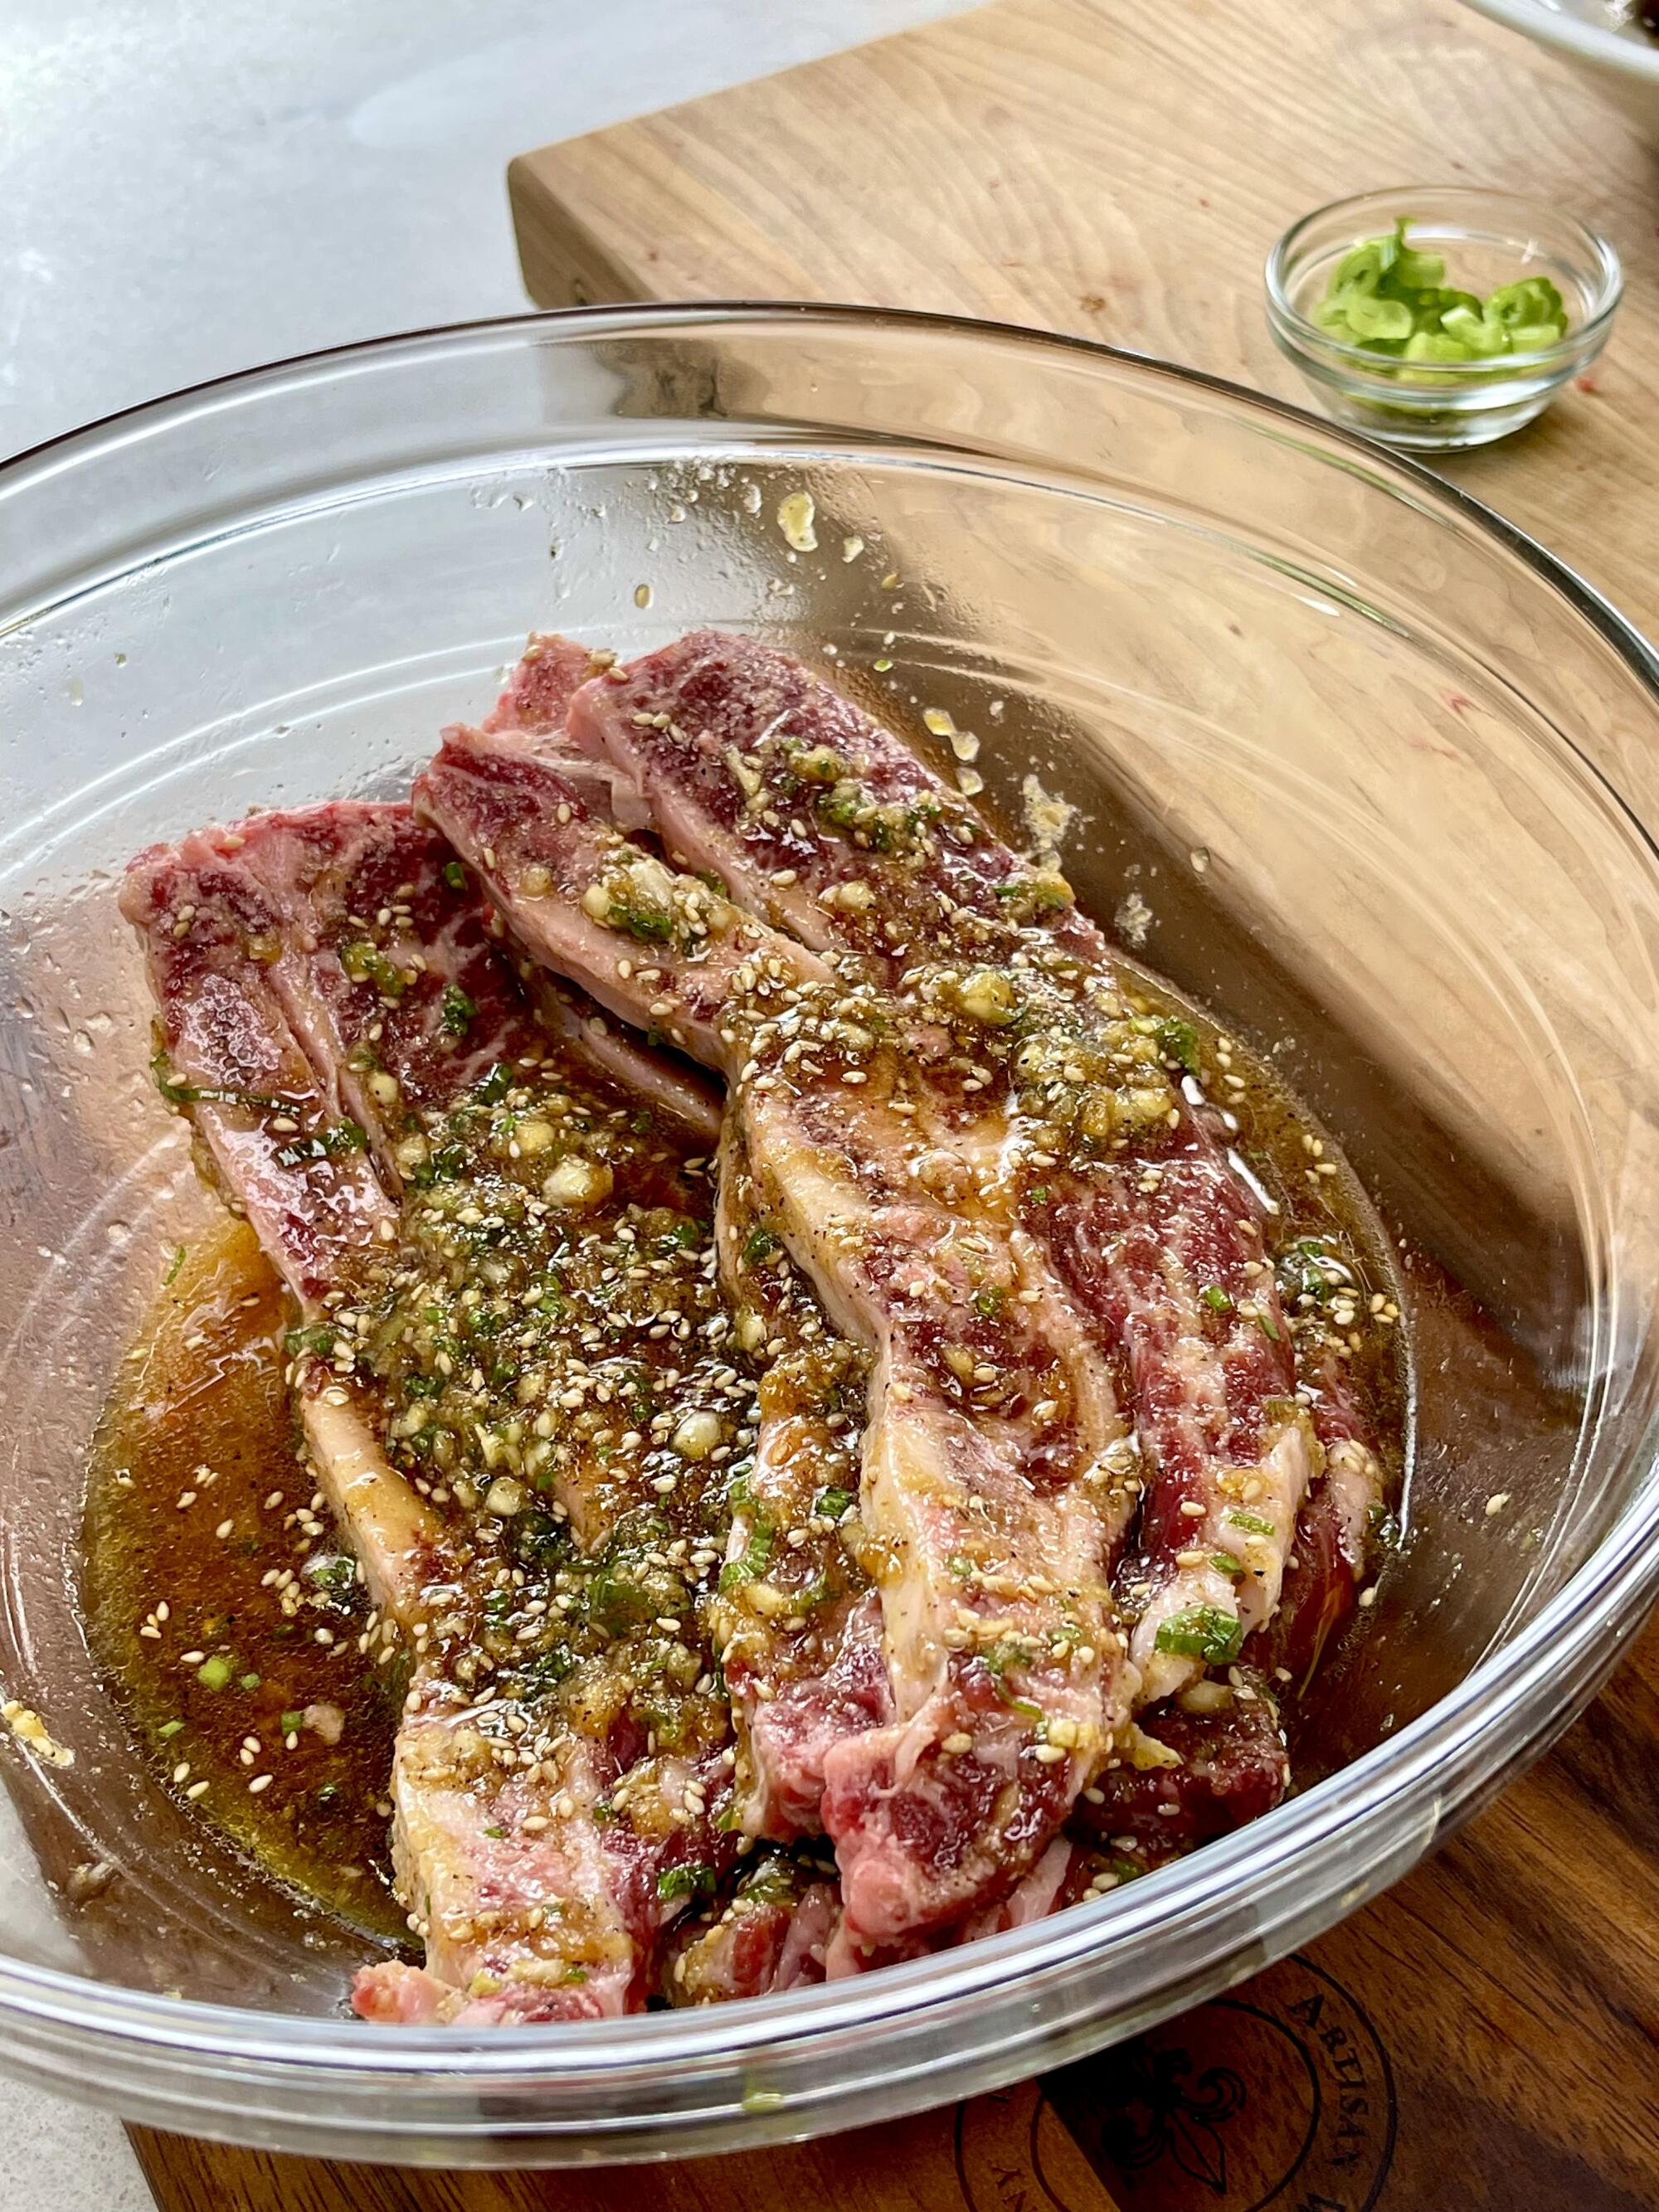 LA galbi, or lateral-cut short ribs, marinating in the "magic sauce" based on marinade used at Park's BBQ in Koreatown.